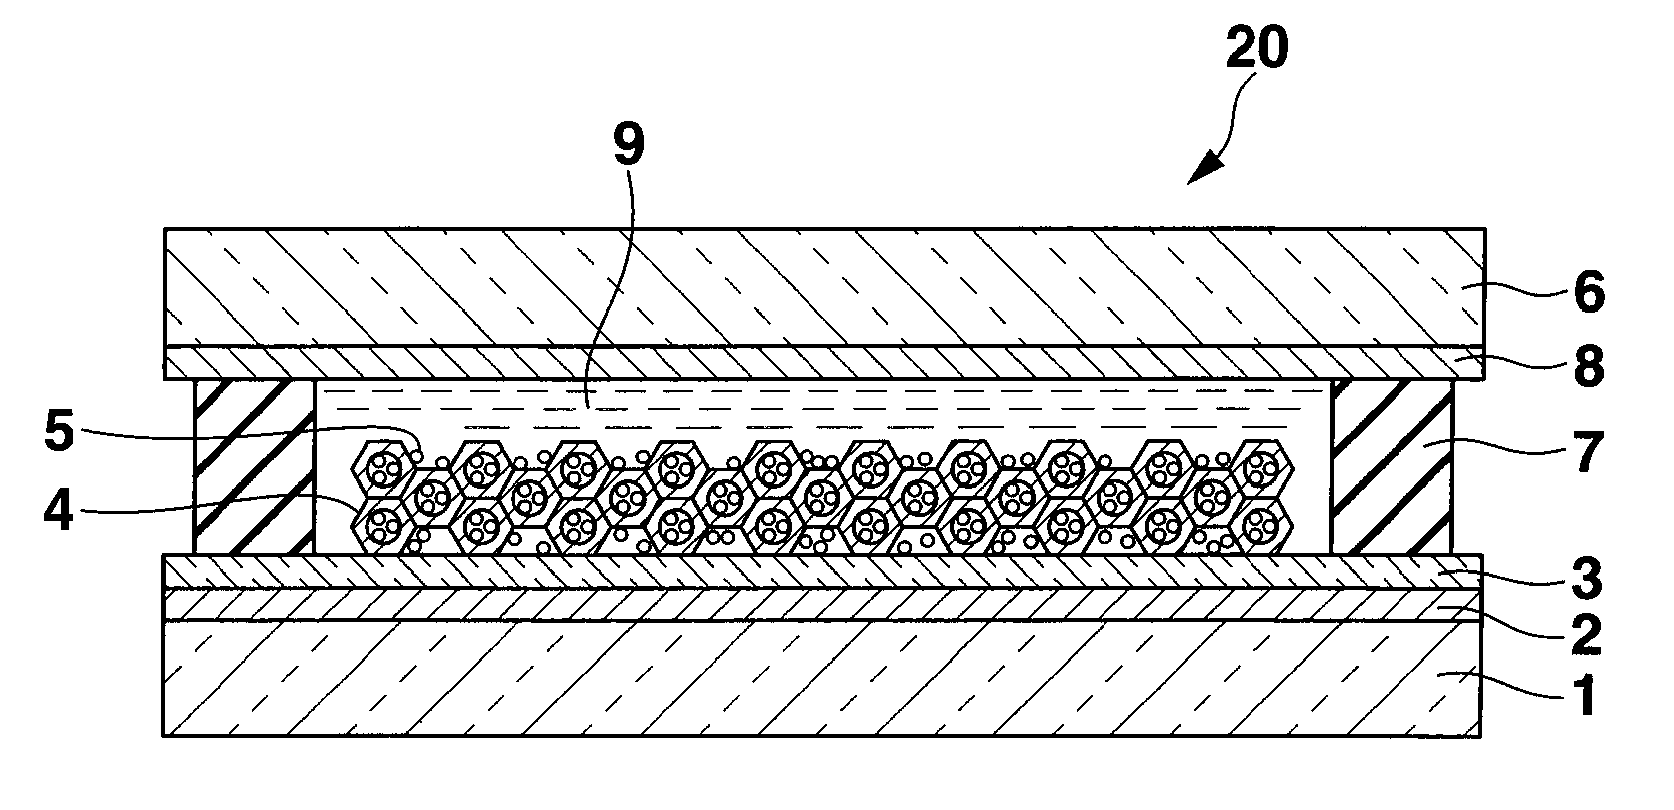 Photovoltaic polarizing element and method of manufacturing the same